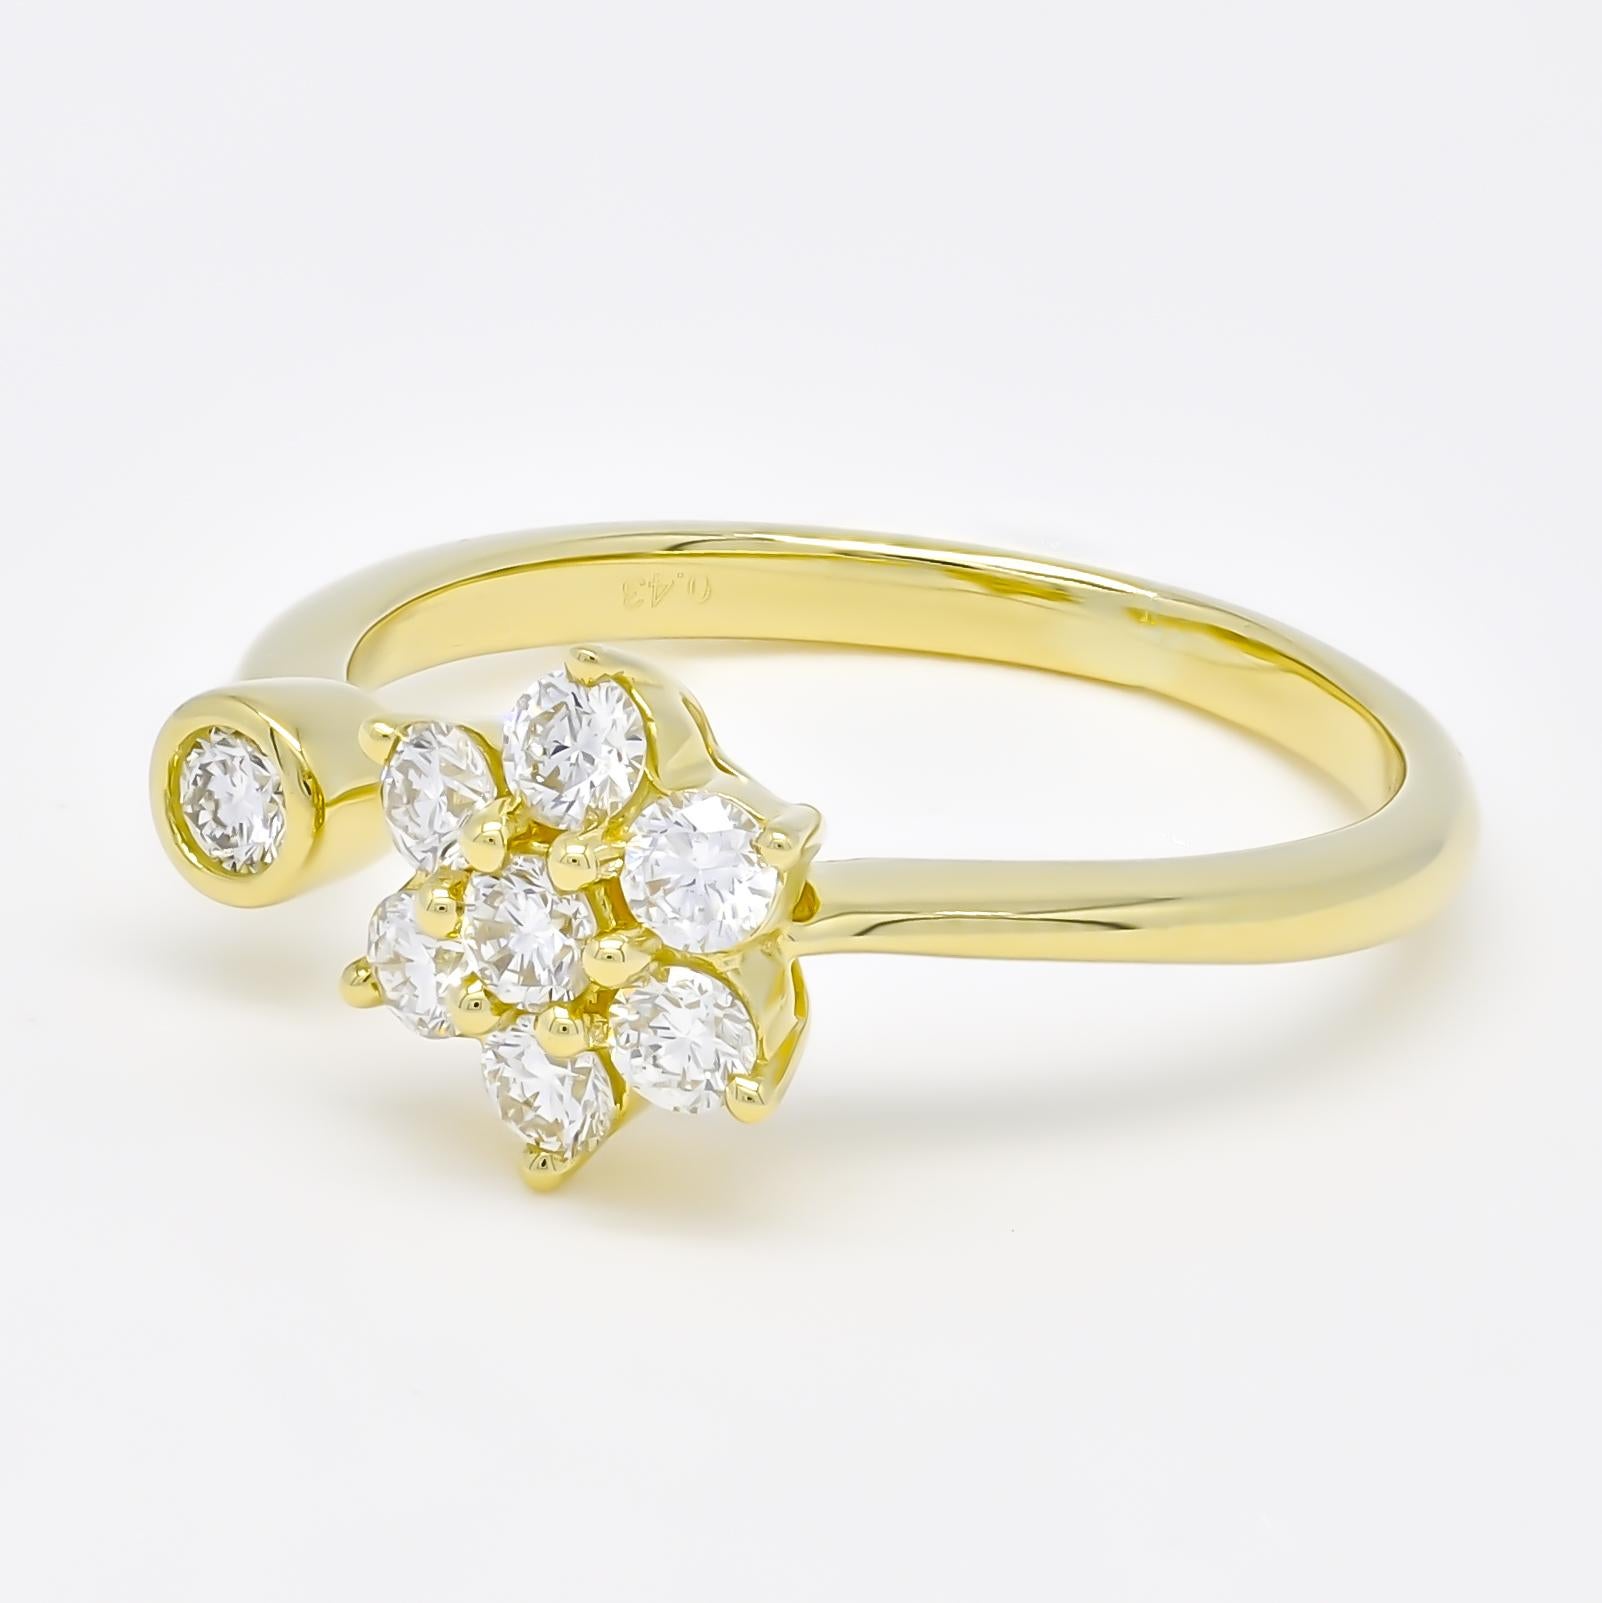 The solitaire cluster open shank modern ring is a contemporary take on the classic solitaire engagement ring design. This ring features a cluster of smaller diamonds arranged in a flower shape, set in a sleek and open shank band.

The open shank